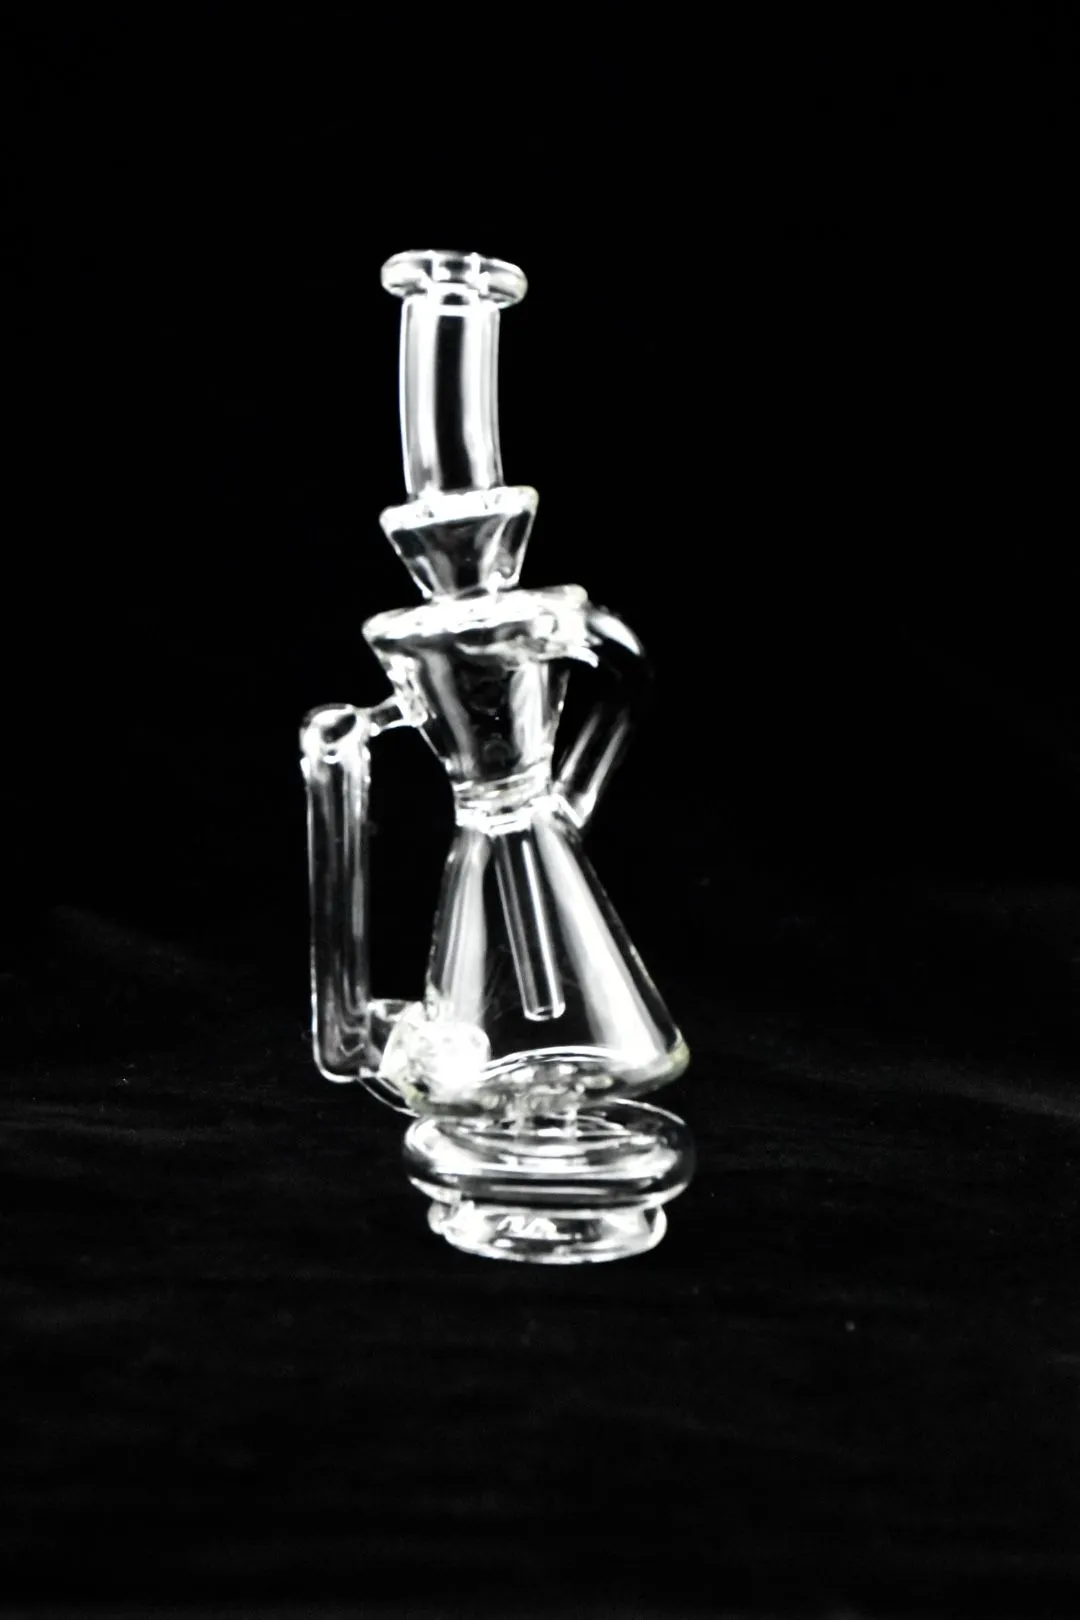 Glass hookah carta or peak two kind recycler transparent electric base drill tower smoking accessories, factory direct price concessions